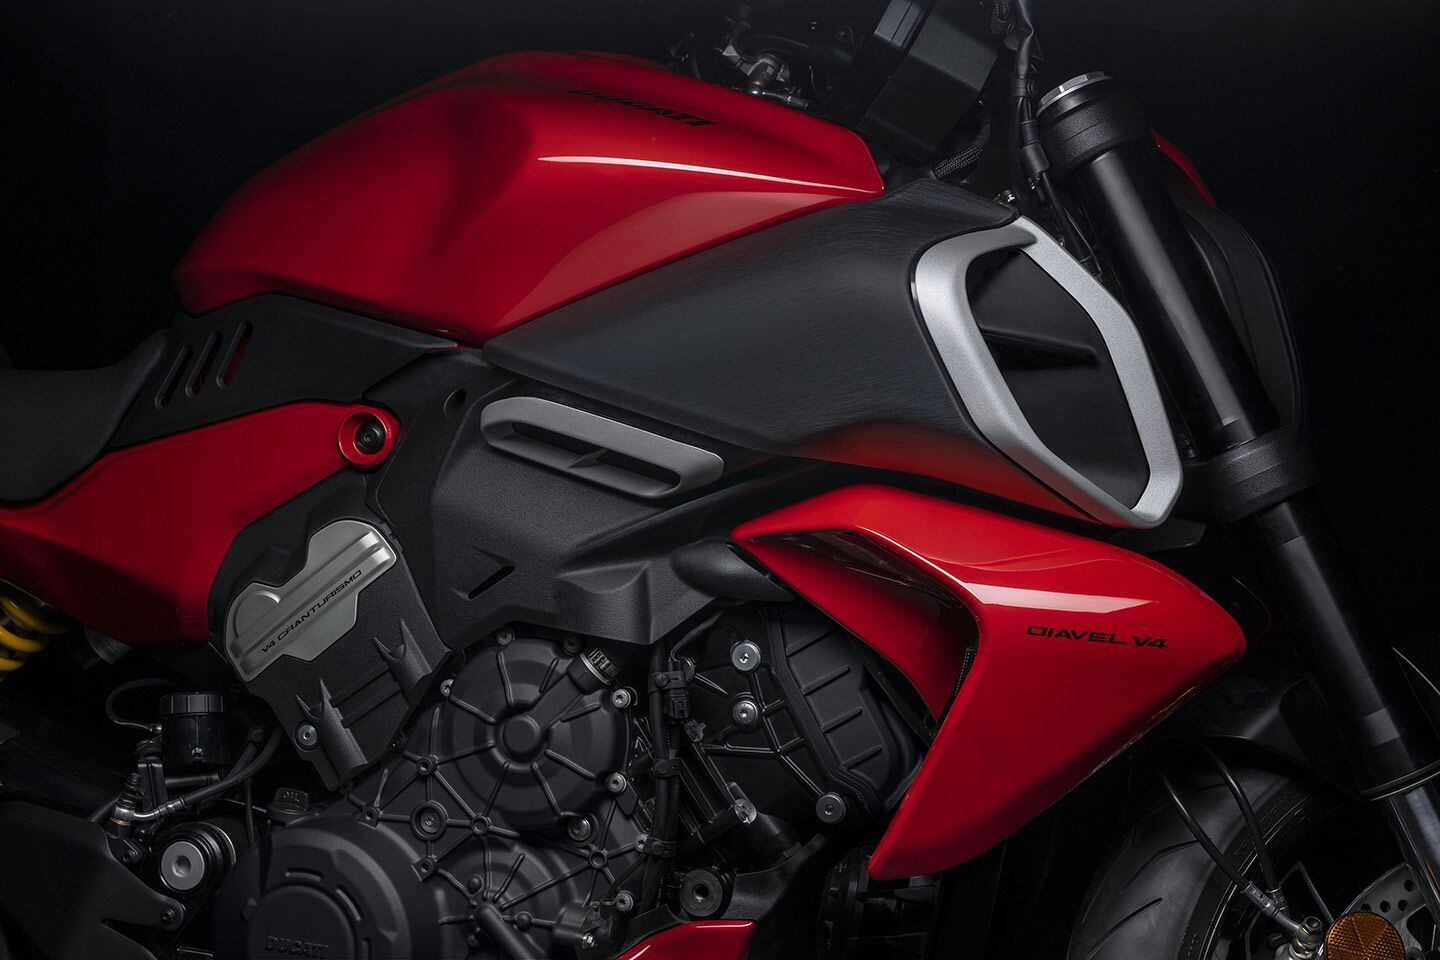 The 2023 Diavel V4 uses the V-4 Granturismo engine from the Multistrada V4. The prominent air intake references previous Diavel models while the radiator shroud and more aggressive tank veer even further from the cruiser formula.